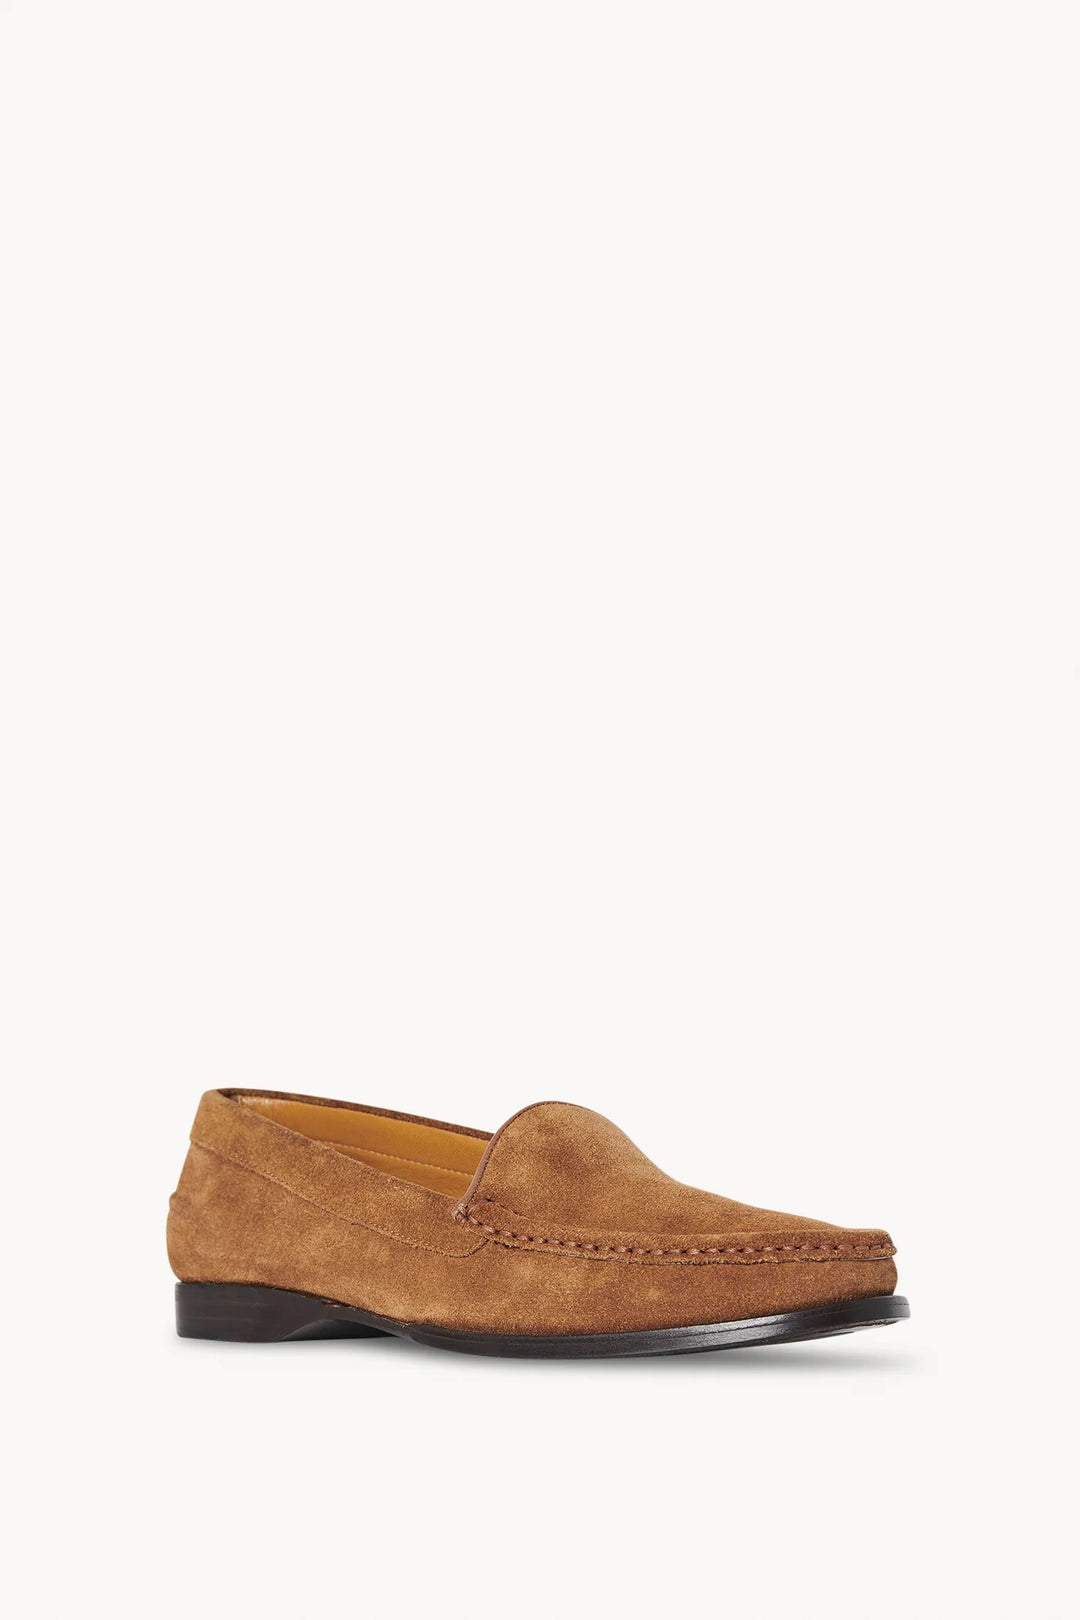 THE ROW RUTH LOAFER IN SUEDE